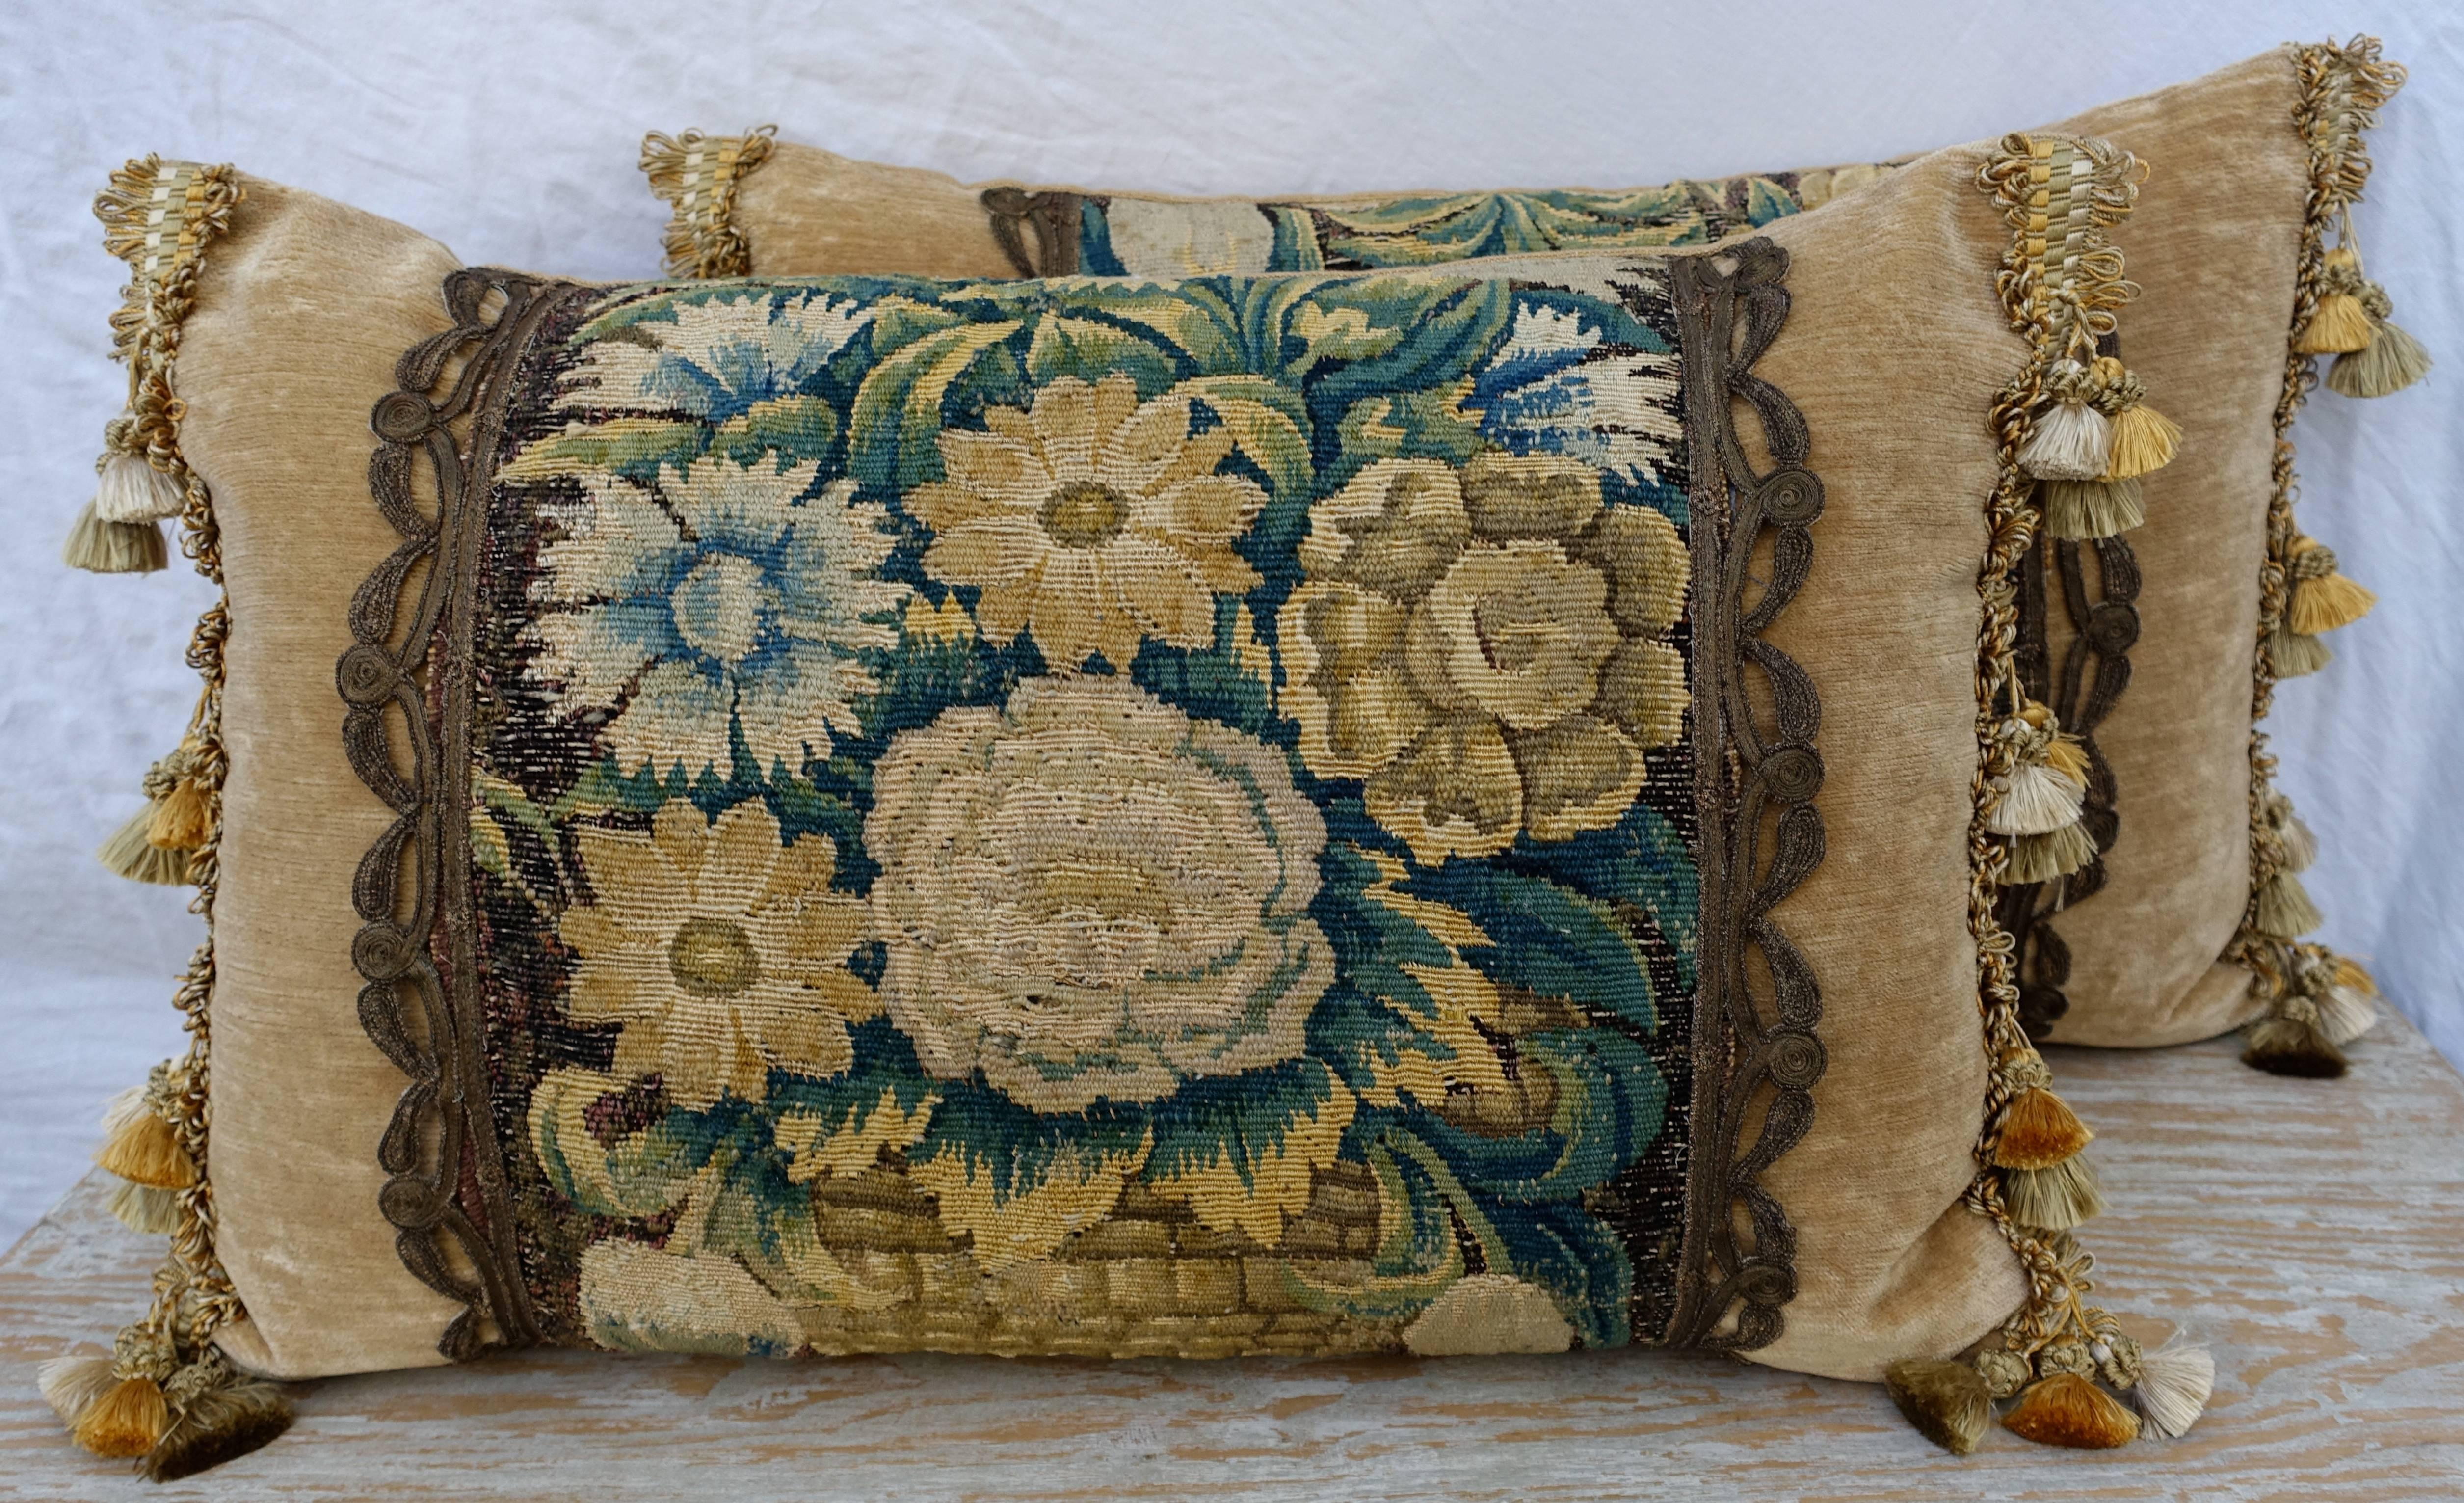 French 17th Century Flemish Tapestry Pillows by Melissa Levinson